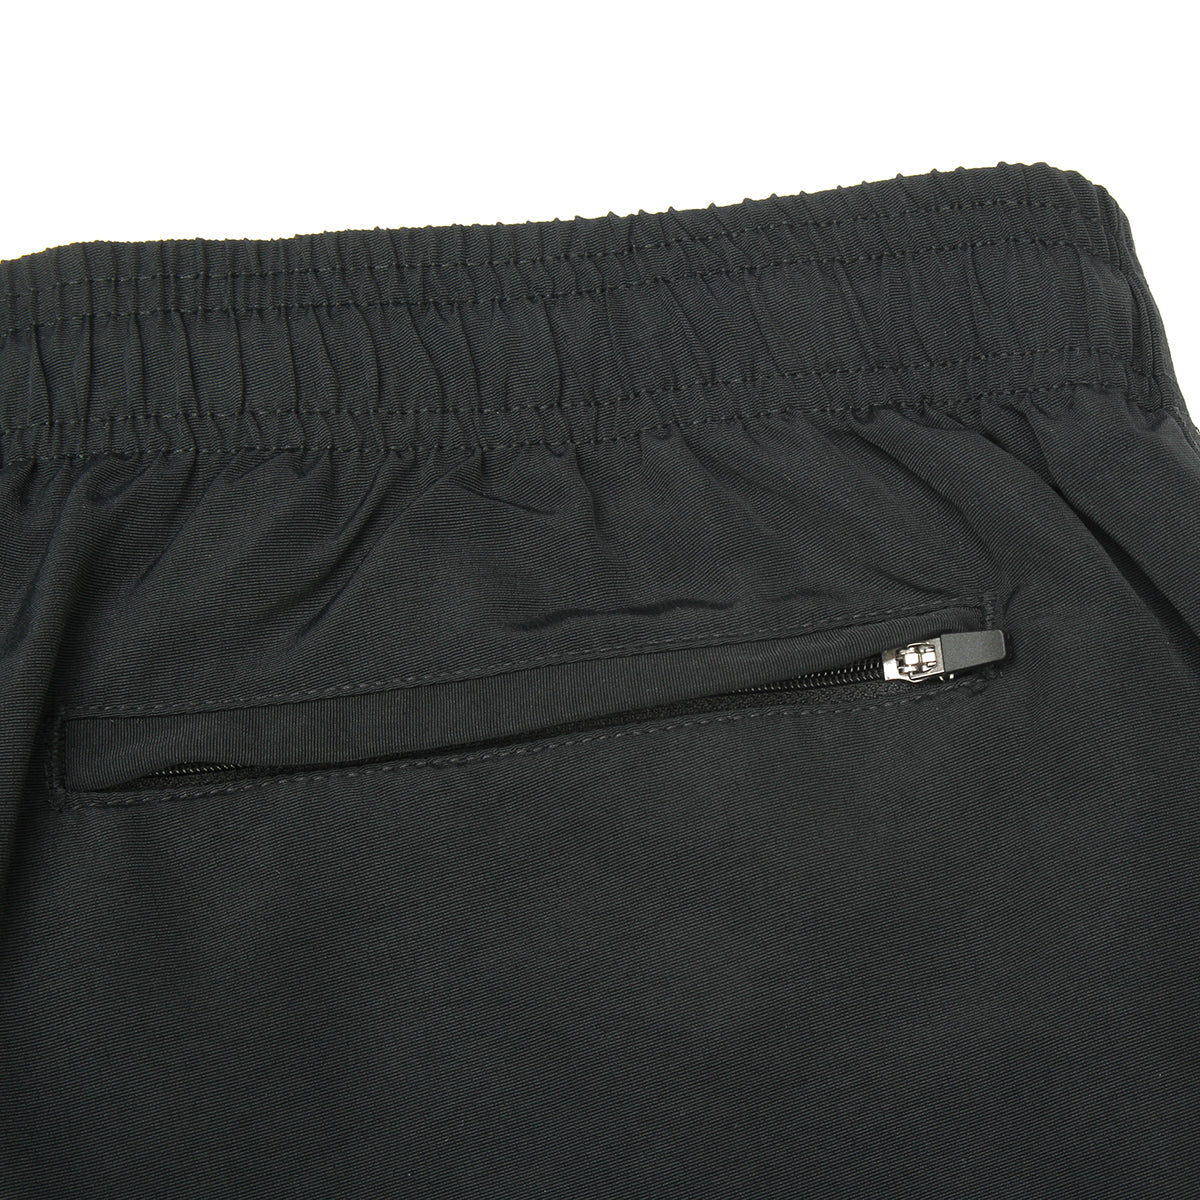 Stussy Stock Water Short Style # 113155 Color : Black